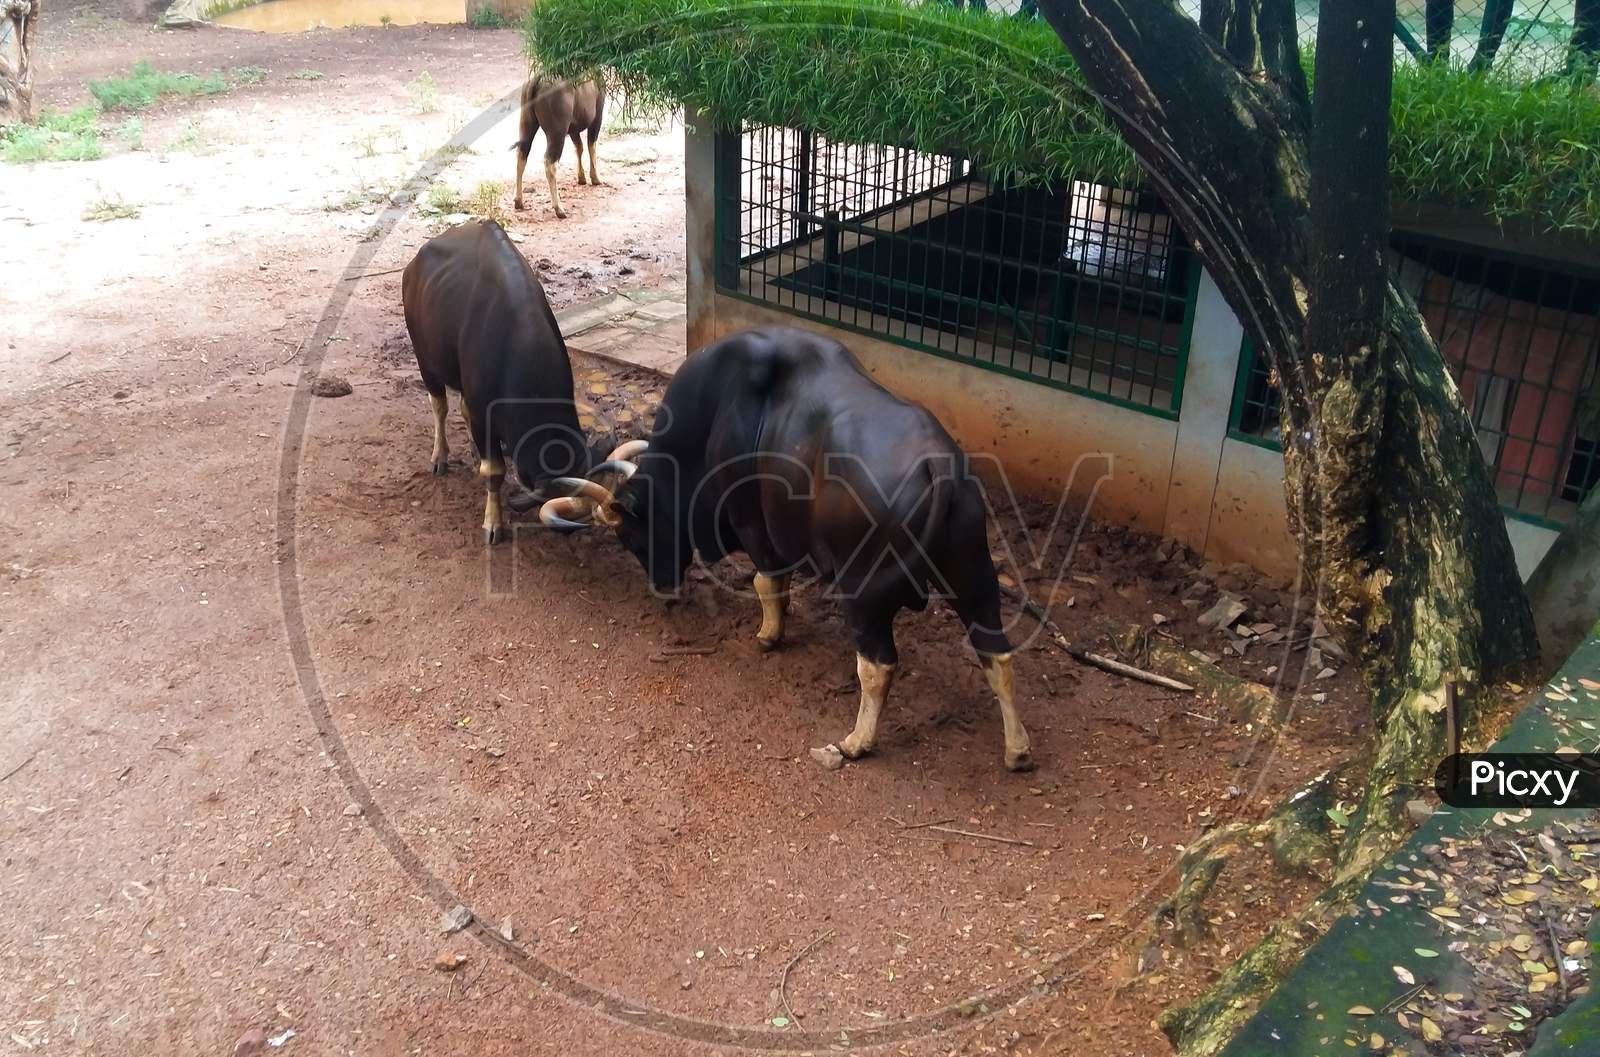 Two Brown Heavy Bulls Fighting With Each Other In India.